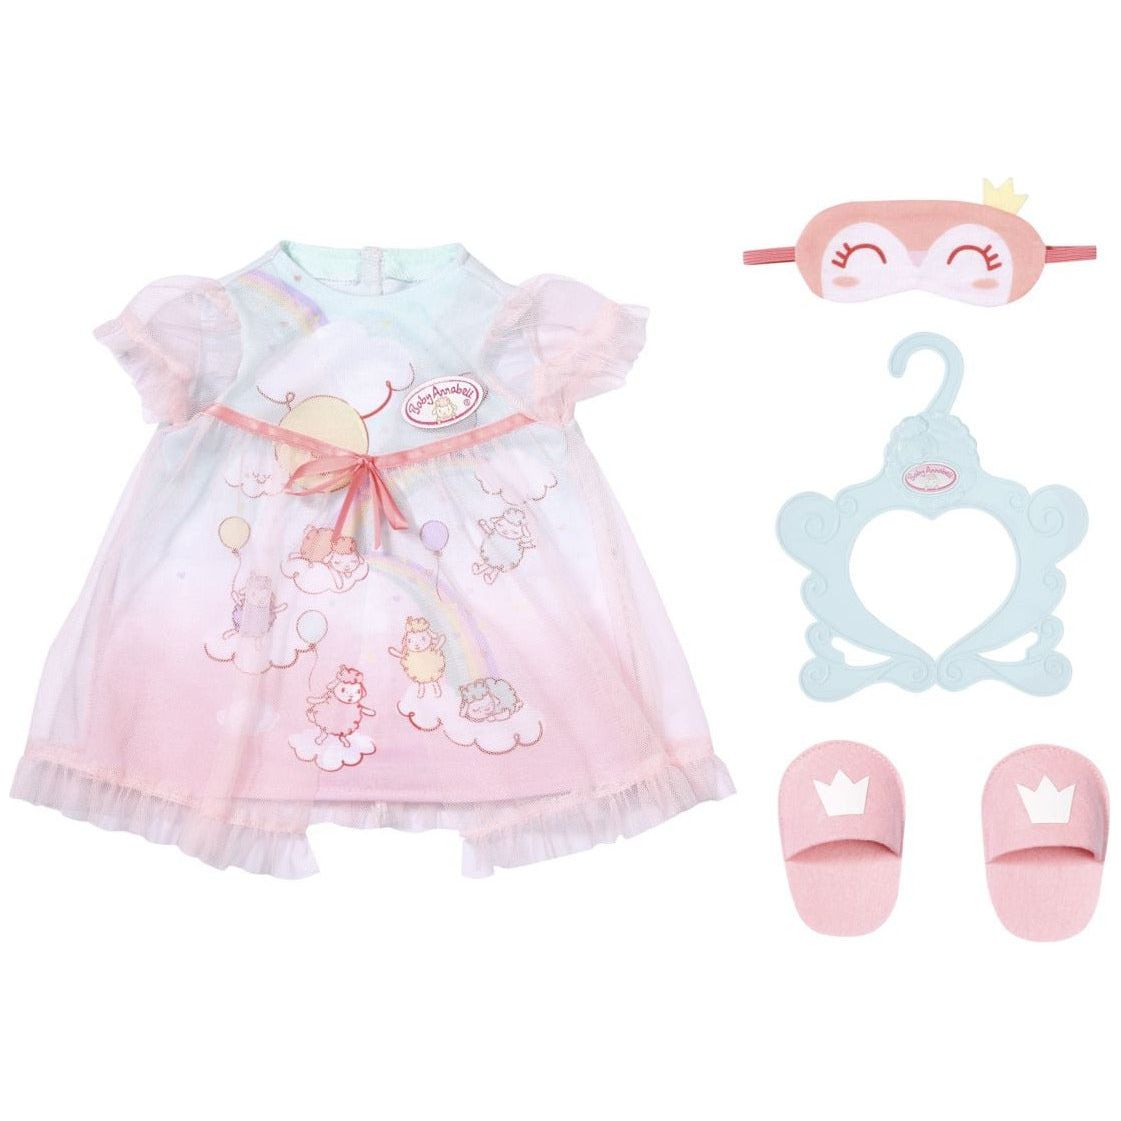 Baby Annabell Sweet Dreams Gown 43cm Baby Annabell